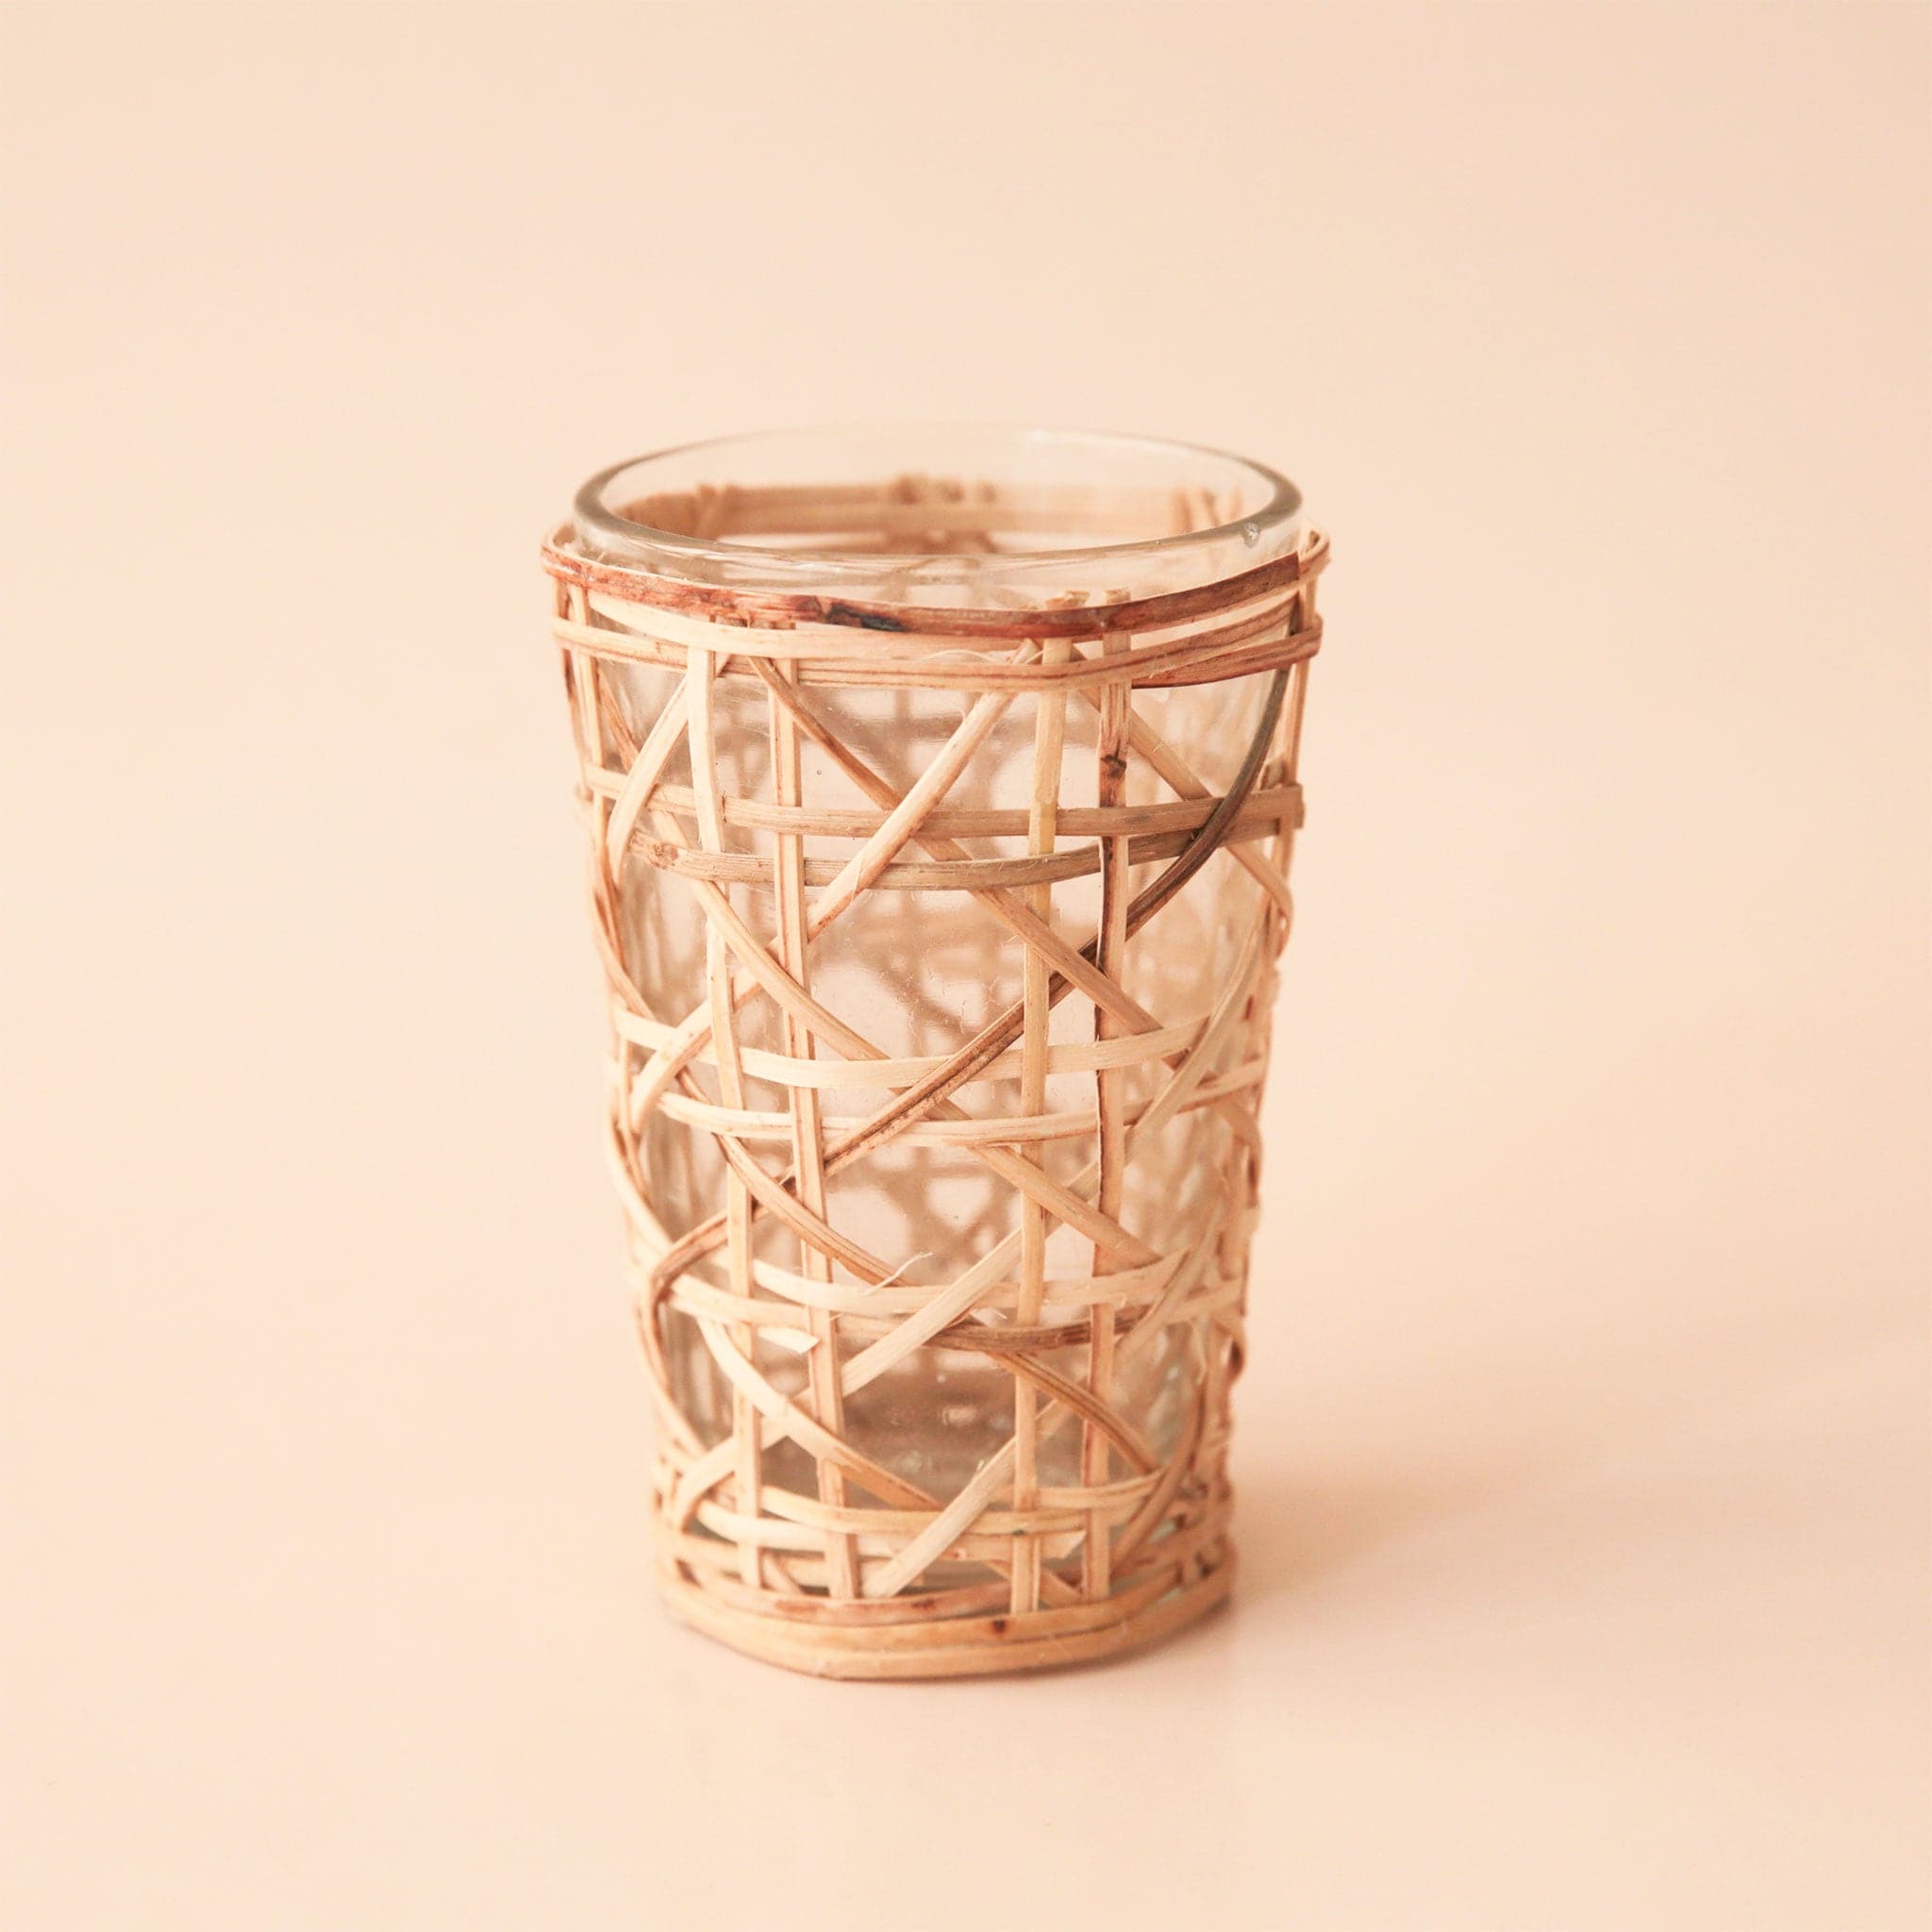 A glass votive with cane webbing detailing.